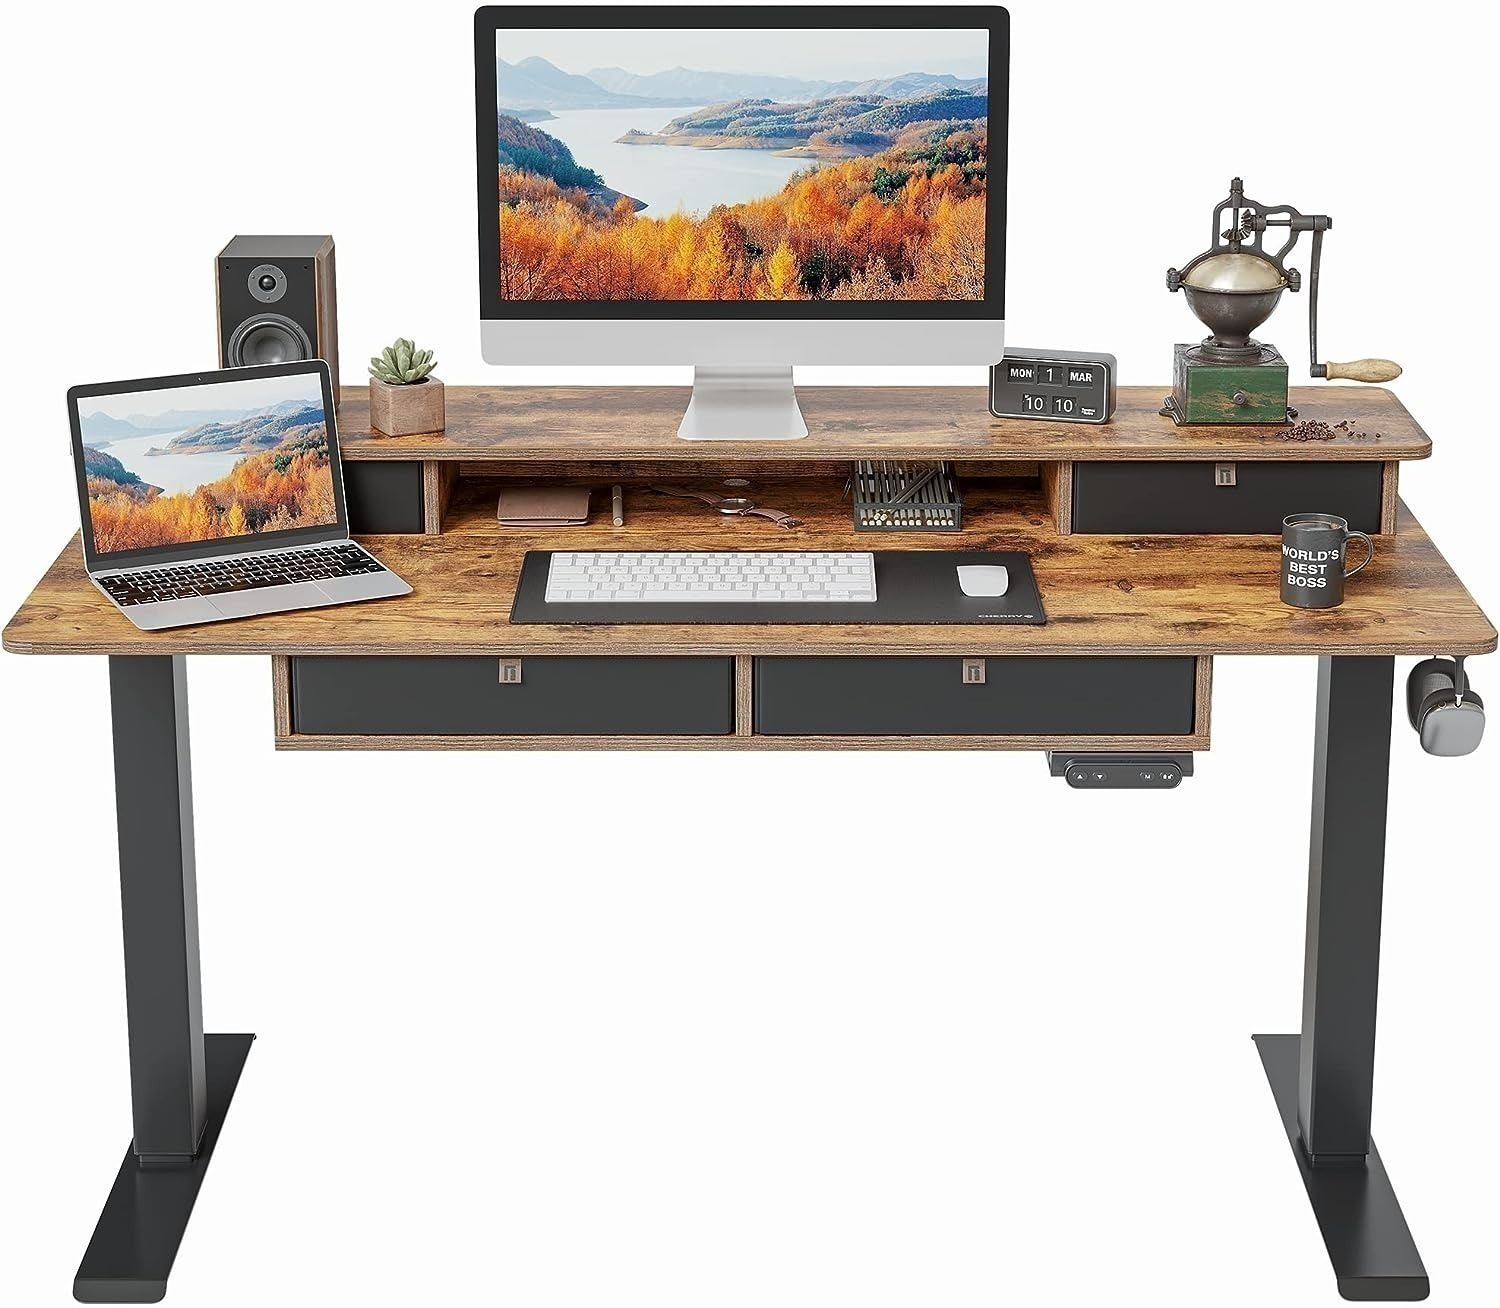 55" x 24" FEZIBO Height Adjustable Electric Standing Desk w/ 4 Drawers (Rustic Brown) $178.49 + Free Shipping